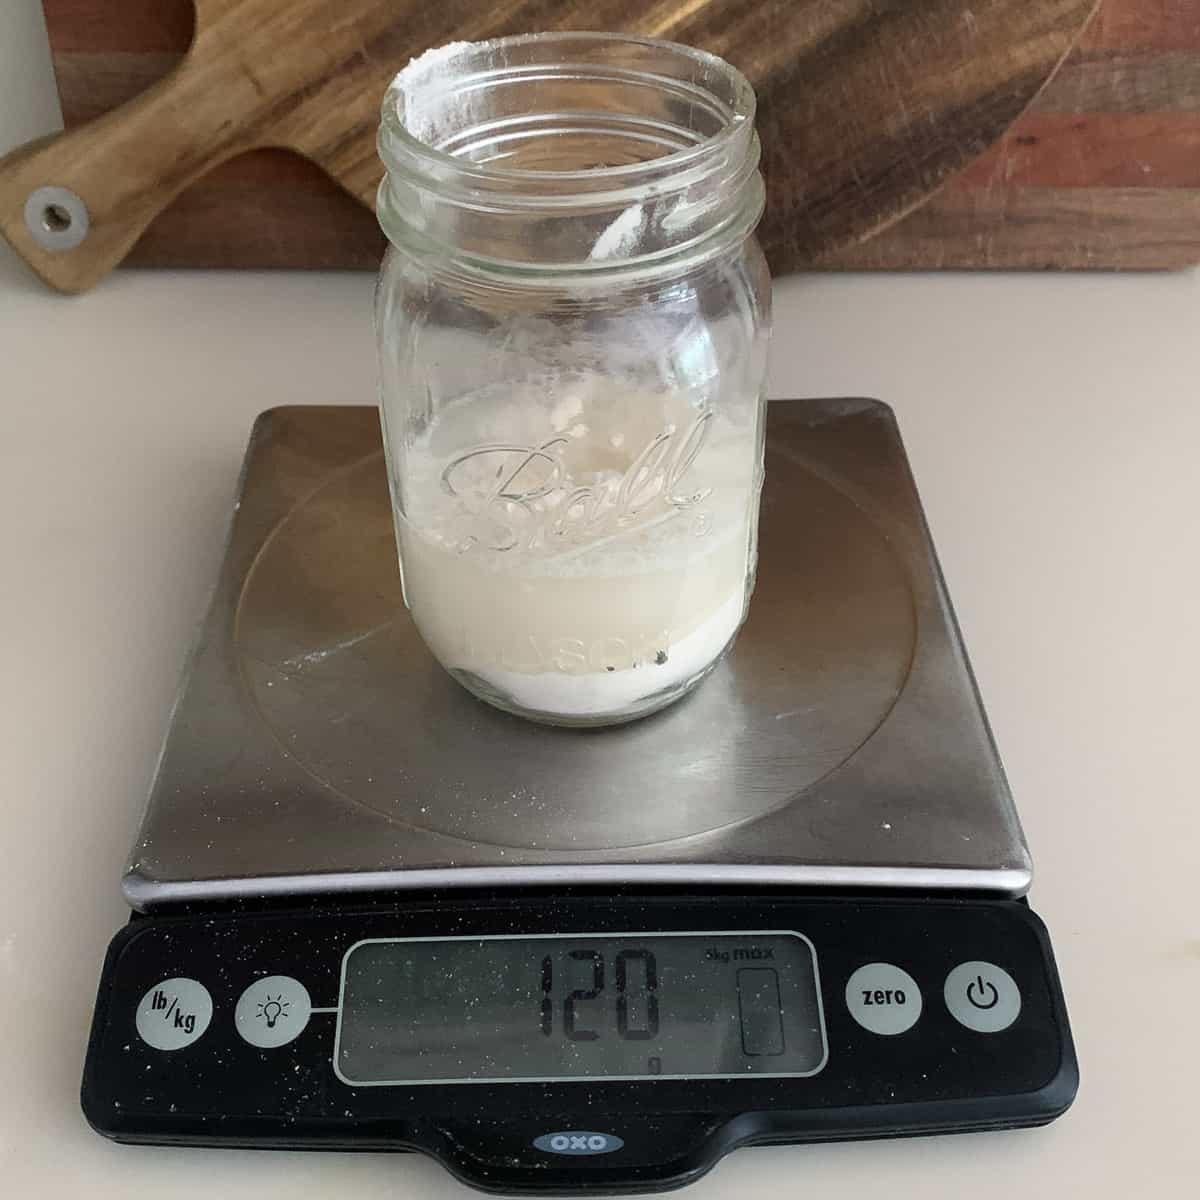 ball jar on scale measuring water at 120 grams